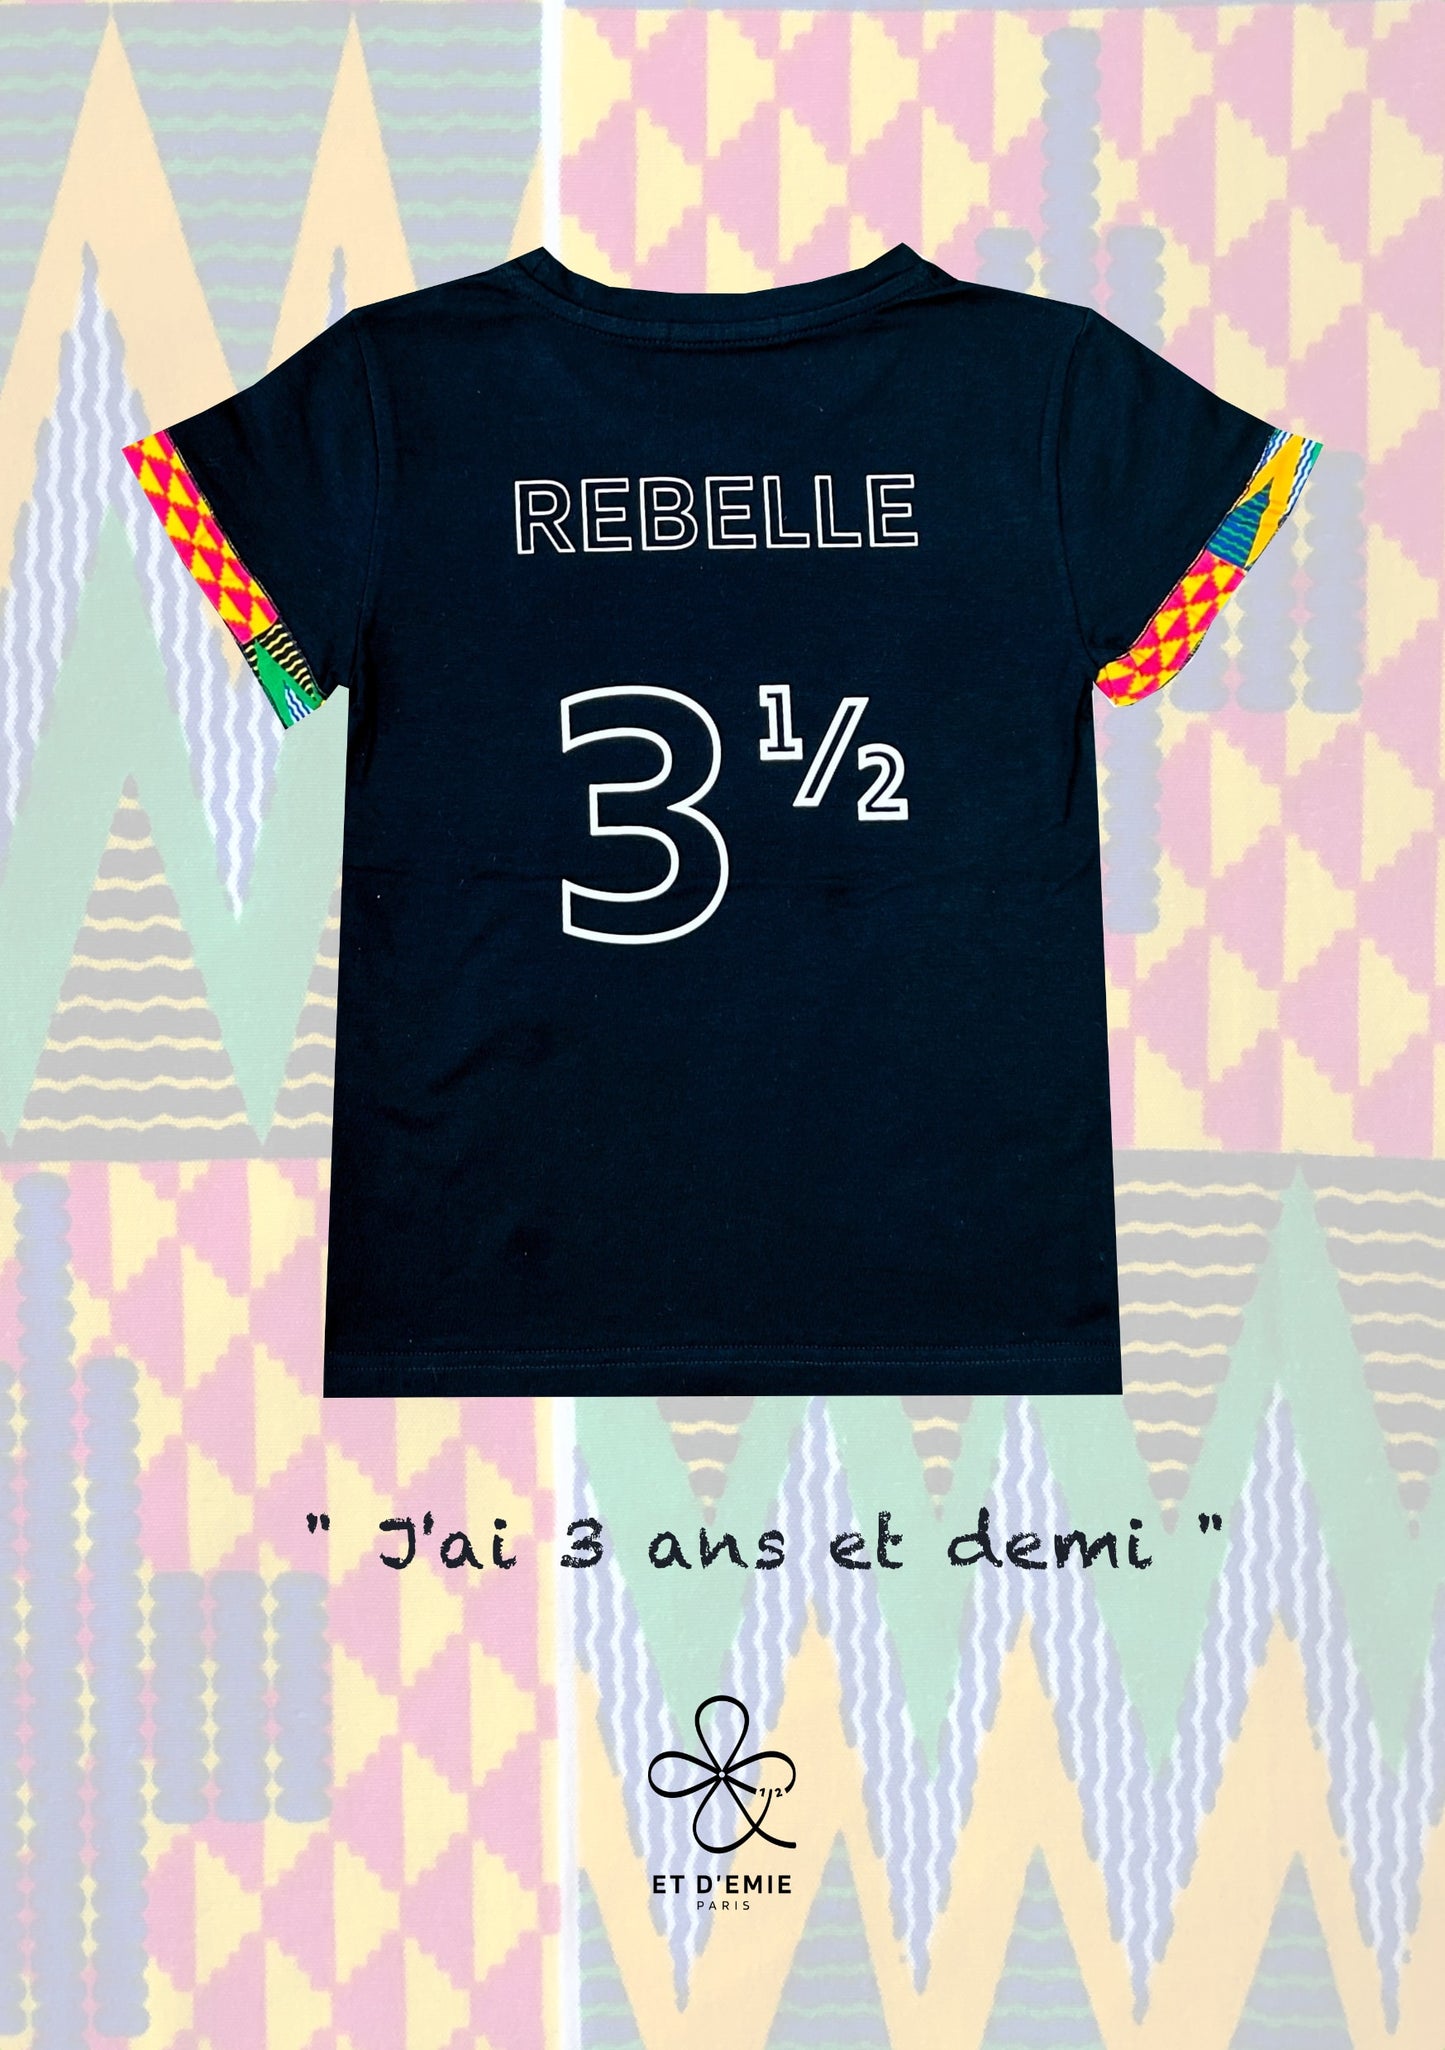 REBELLE t-shirt "I'm 3 and a half years old" embroidered in organic cotton and wax 🇫🇷